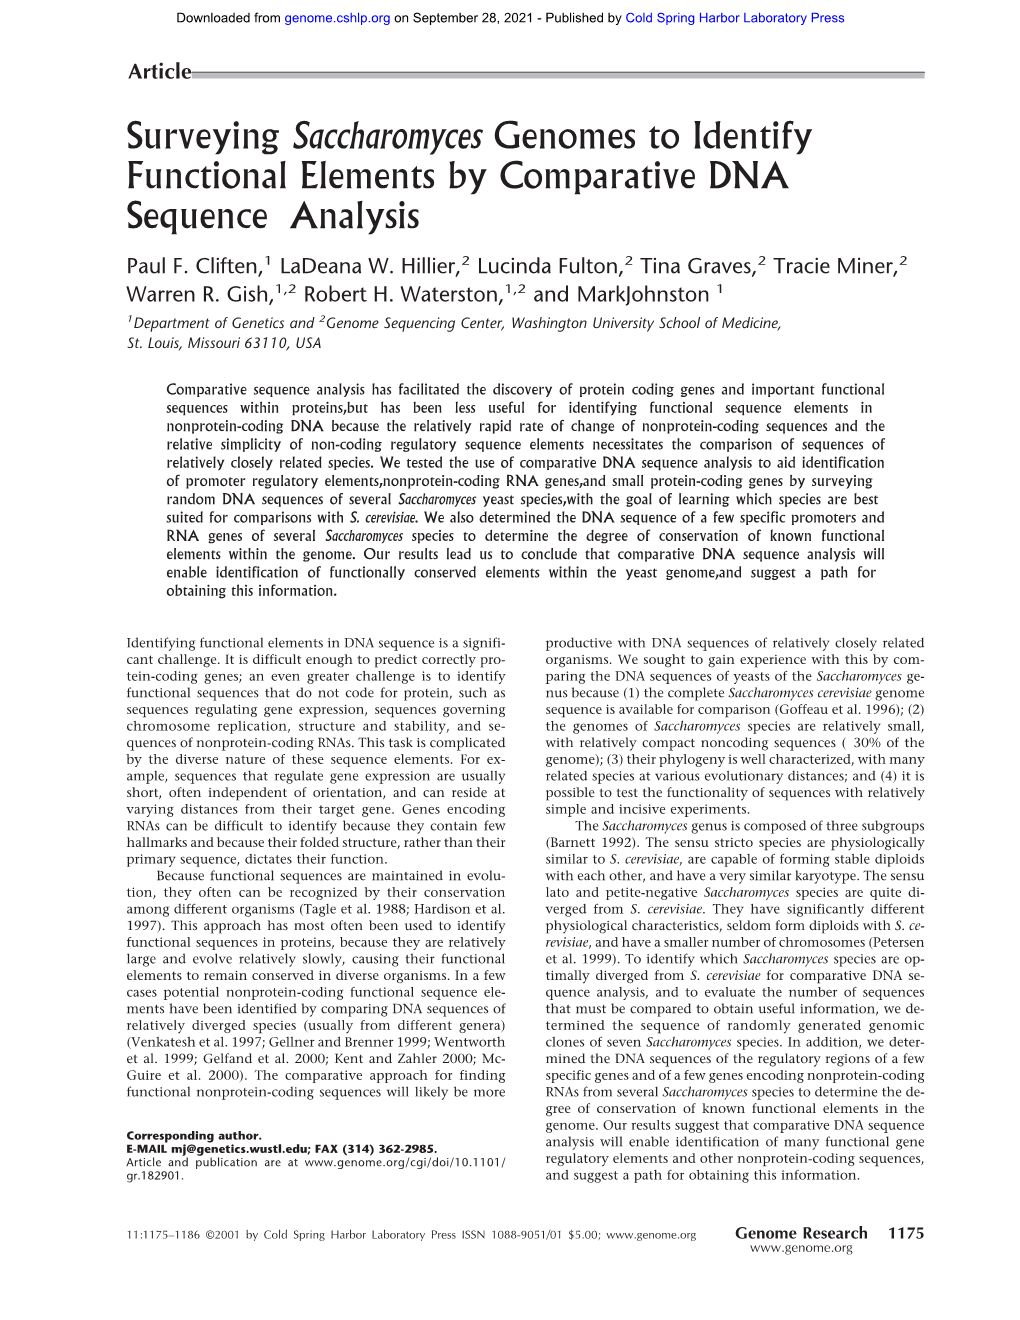 Surveying Saccharomyces Genomes to Identify Functional Elements by Comparative DNA Sequence Analysis